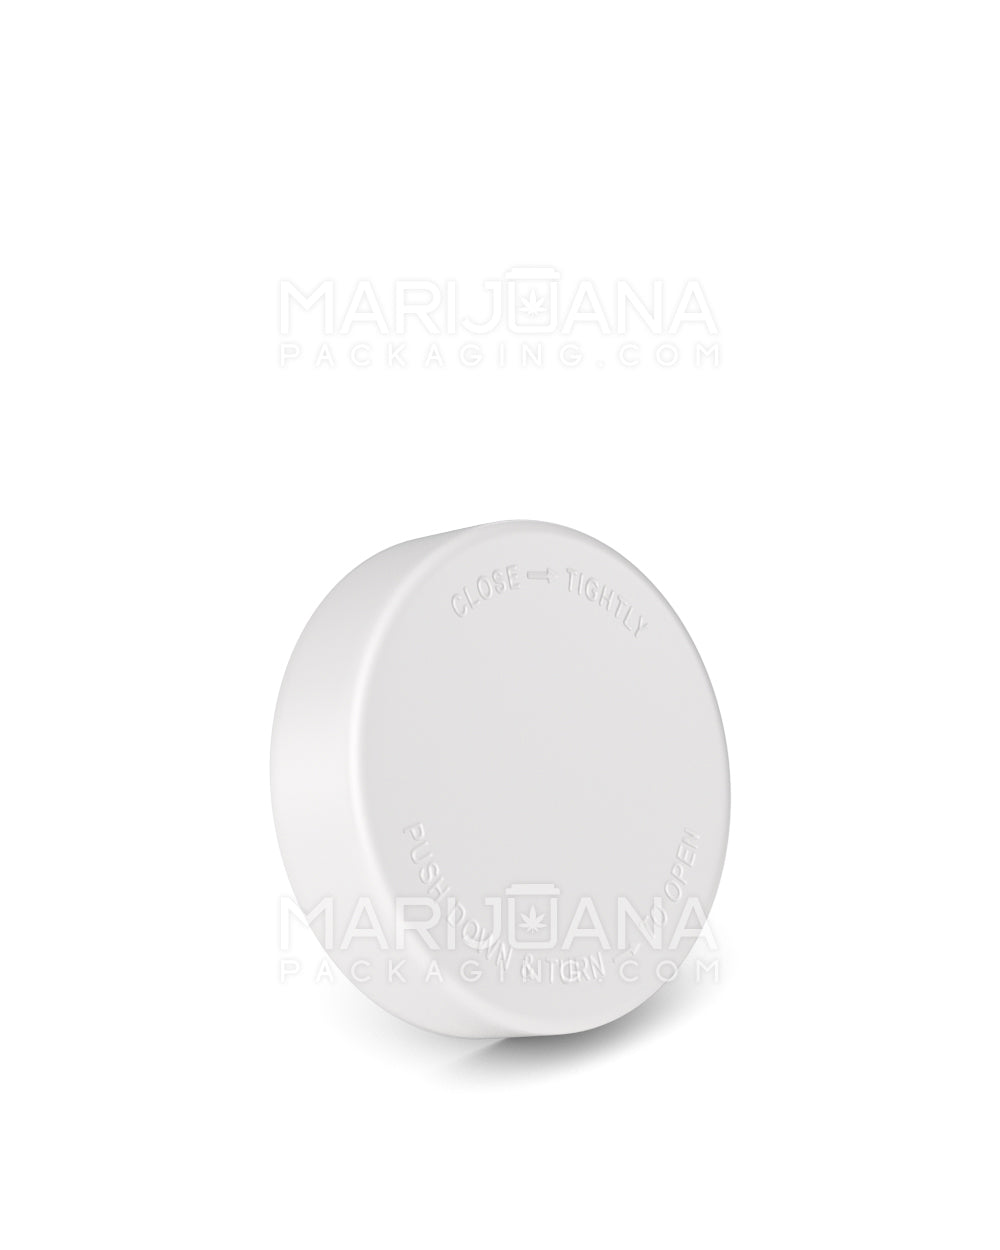 Child Resistant | Smooth Flat Push Down & Turn Plastic Caps w/ Text & Foam Liner | 48mm - Matte White - 120 Count - 1